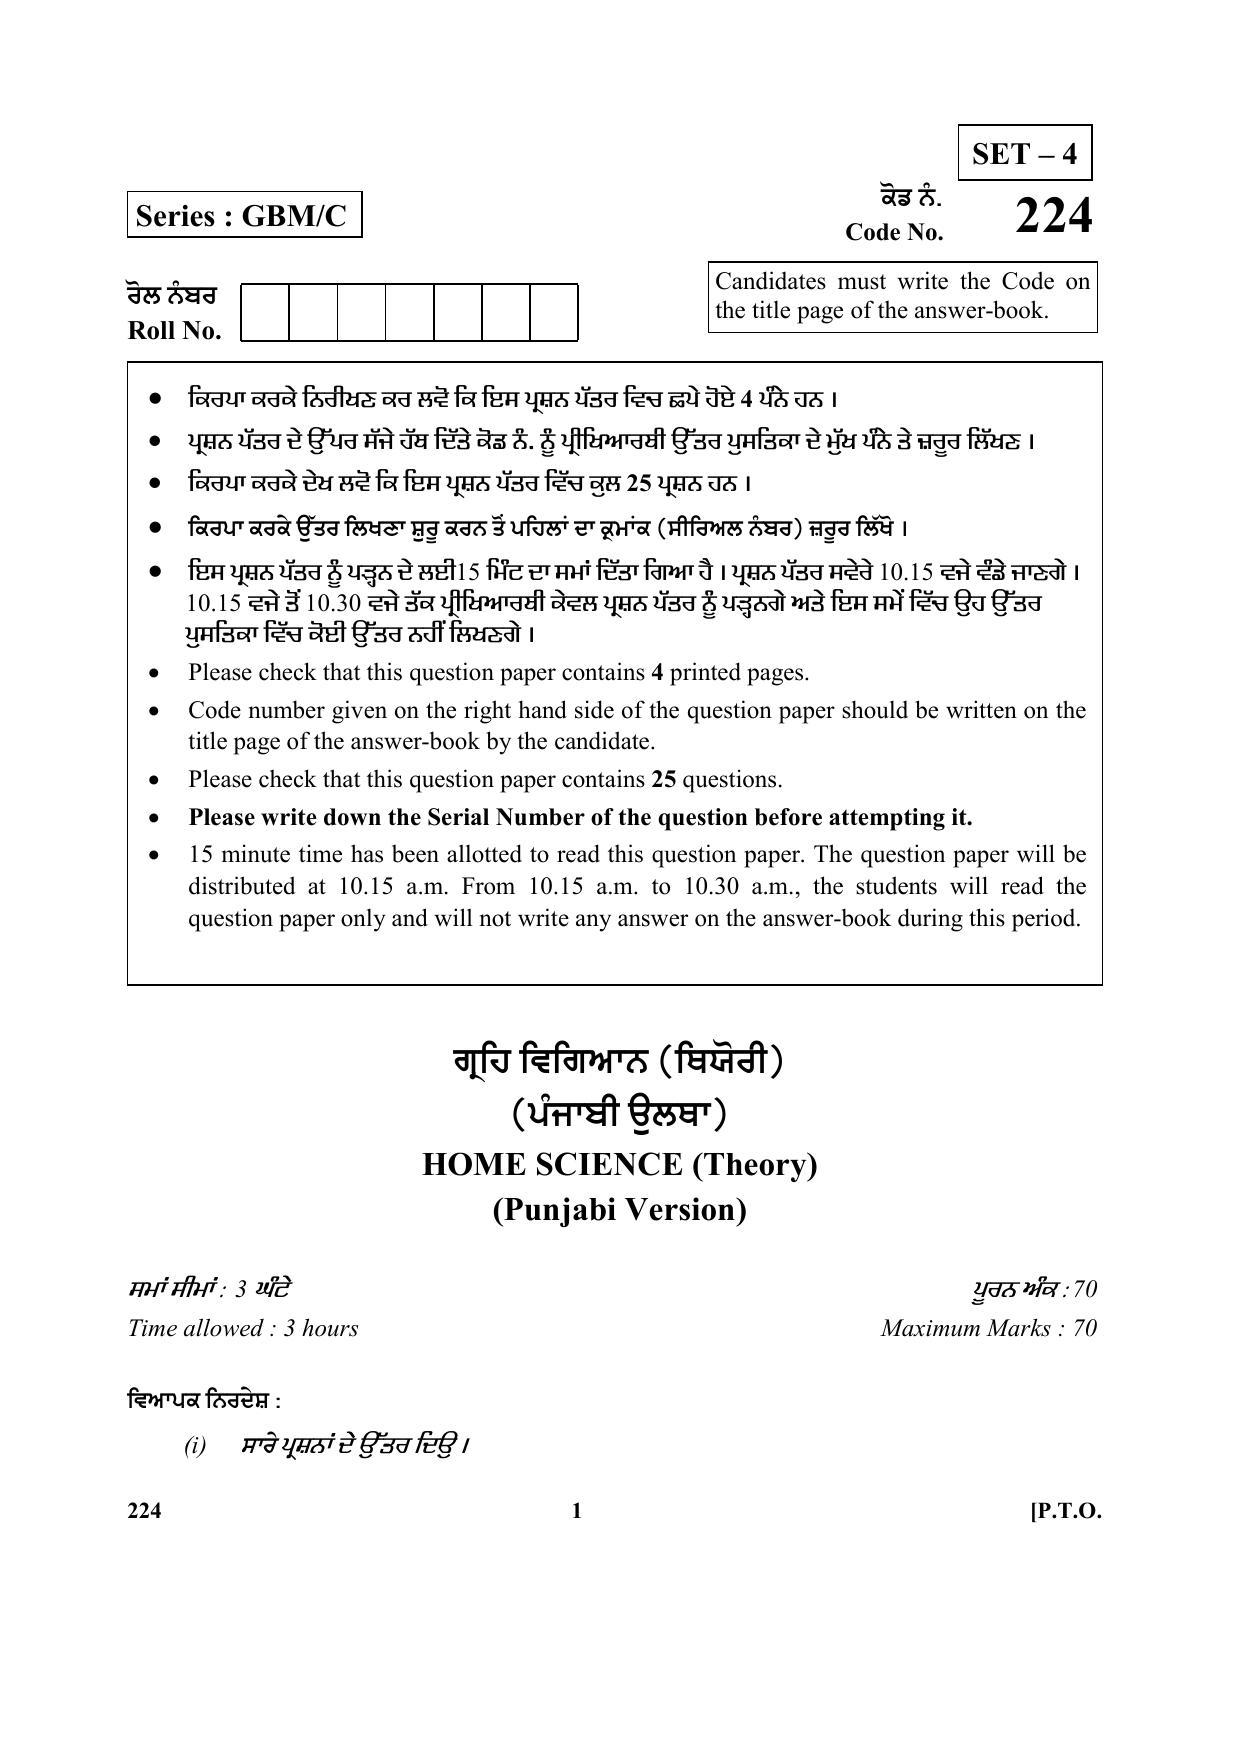 CBSE Class 12 224 (Home Science) Punjabi 2017-comptt Question Paper - Page 1